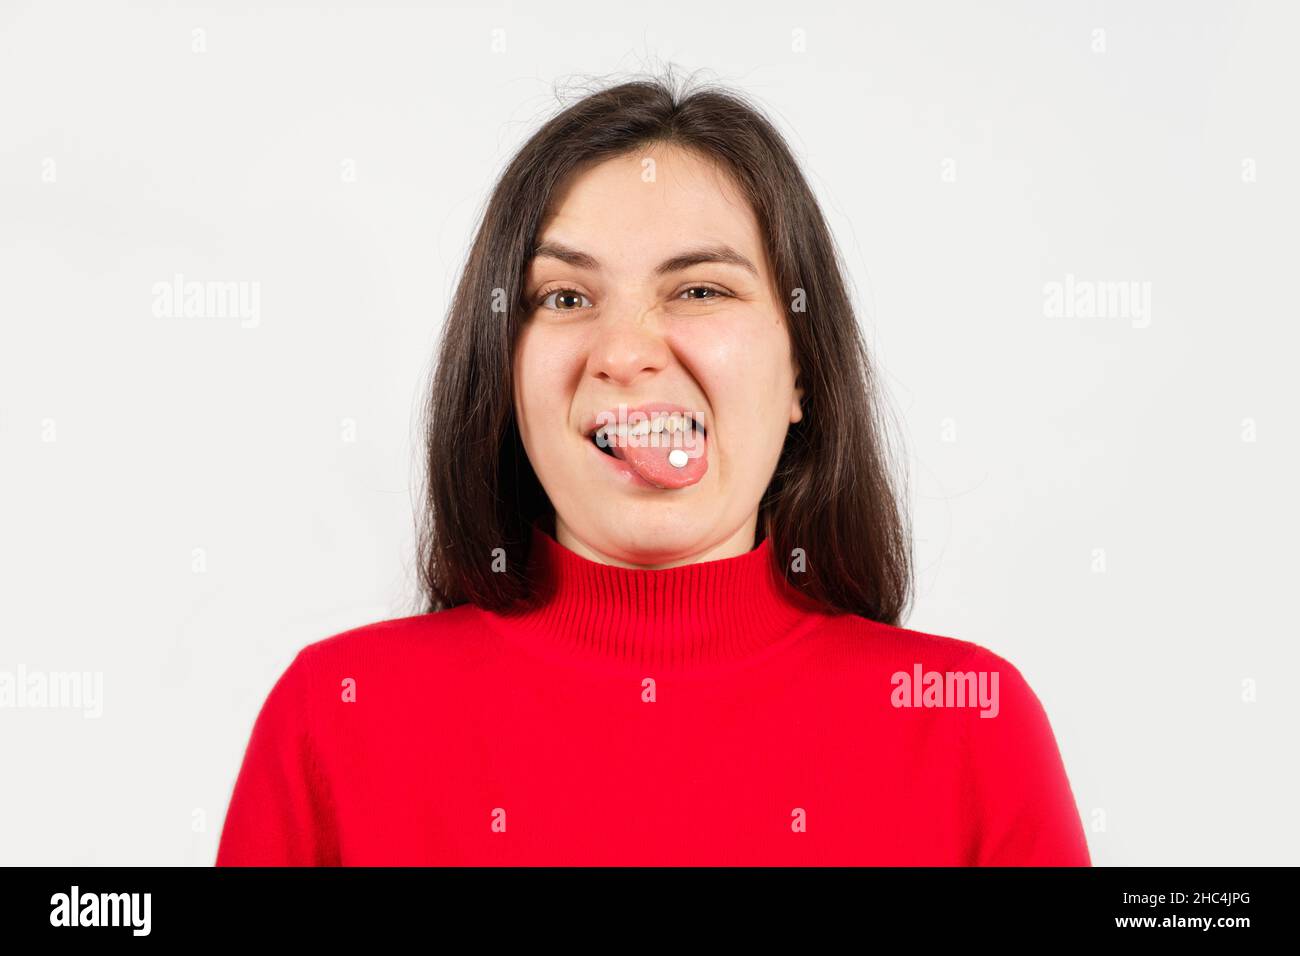 A Woman In A Red Sweater With A White Pill On Her Tongue With Her Mouth Open Writhes A 